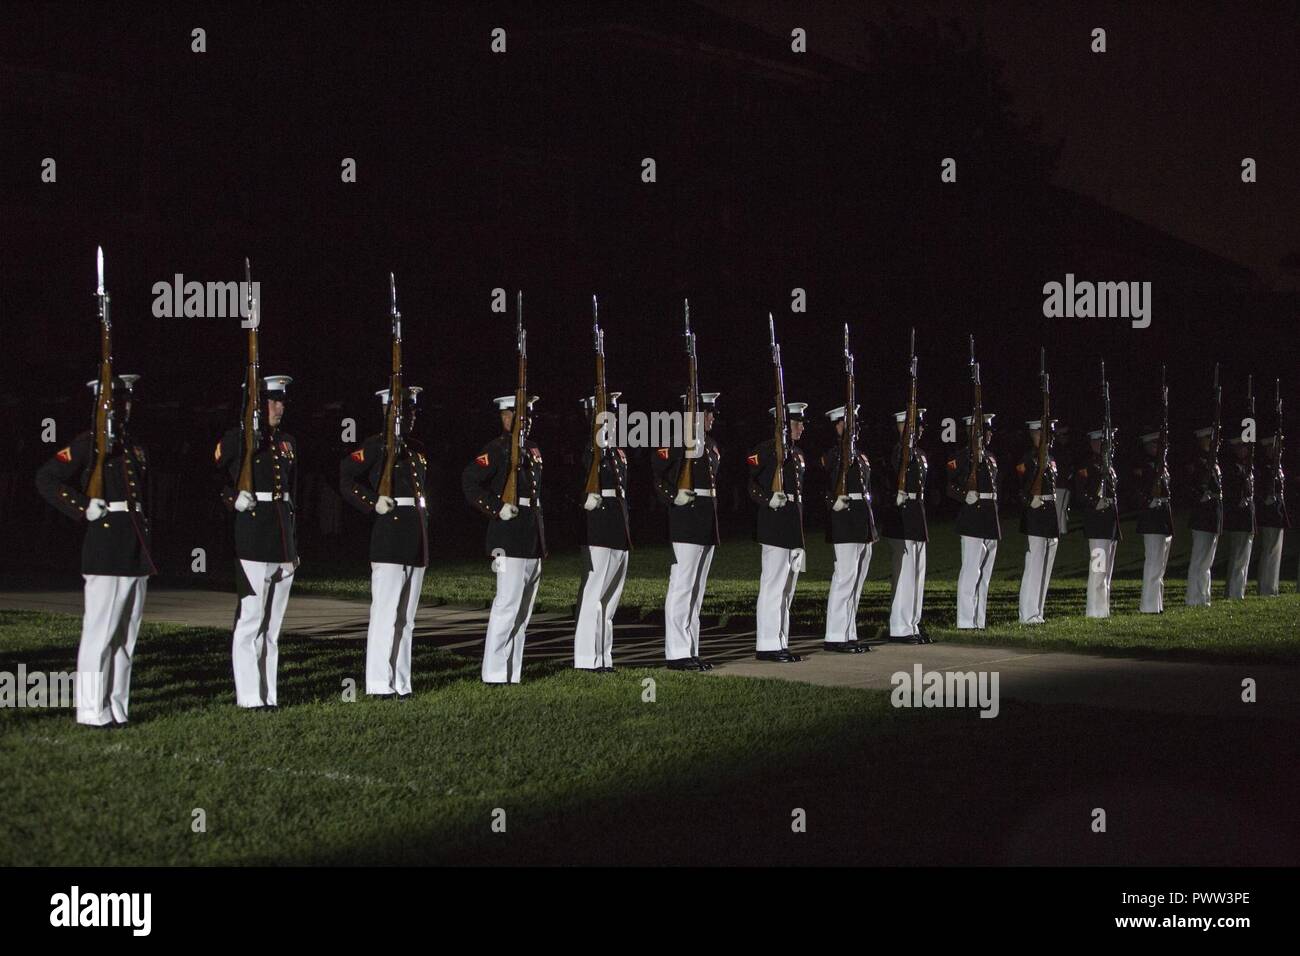 The Marine Corps Silent Drill Platoon performs during an evening parade at Marine Barracks Washington, Washington, D.C., June 23, 2017. Evening parades are held as a means of honoring senior officials, distinguished citizens and supporters of the Marine Corps. Stock Photo